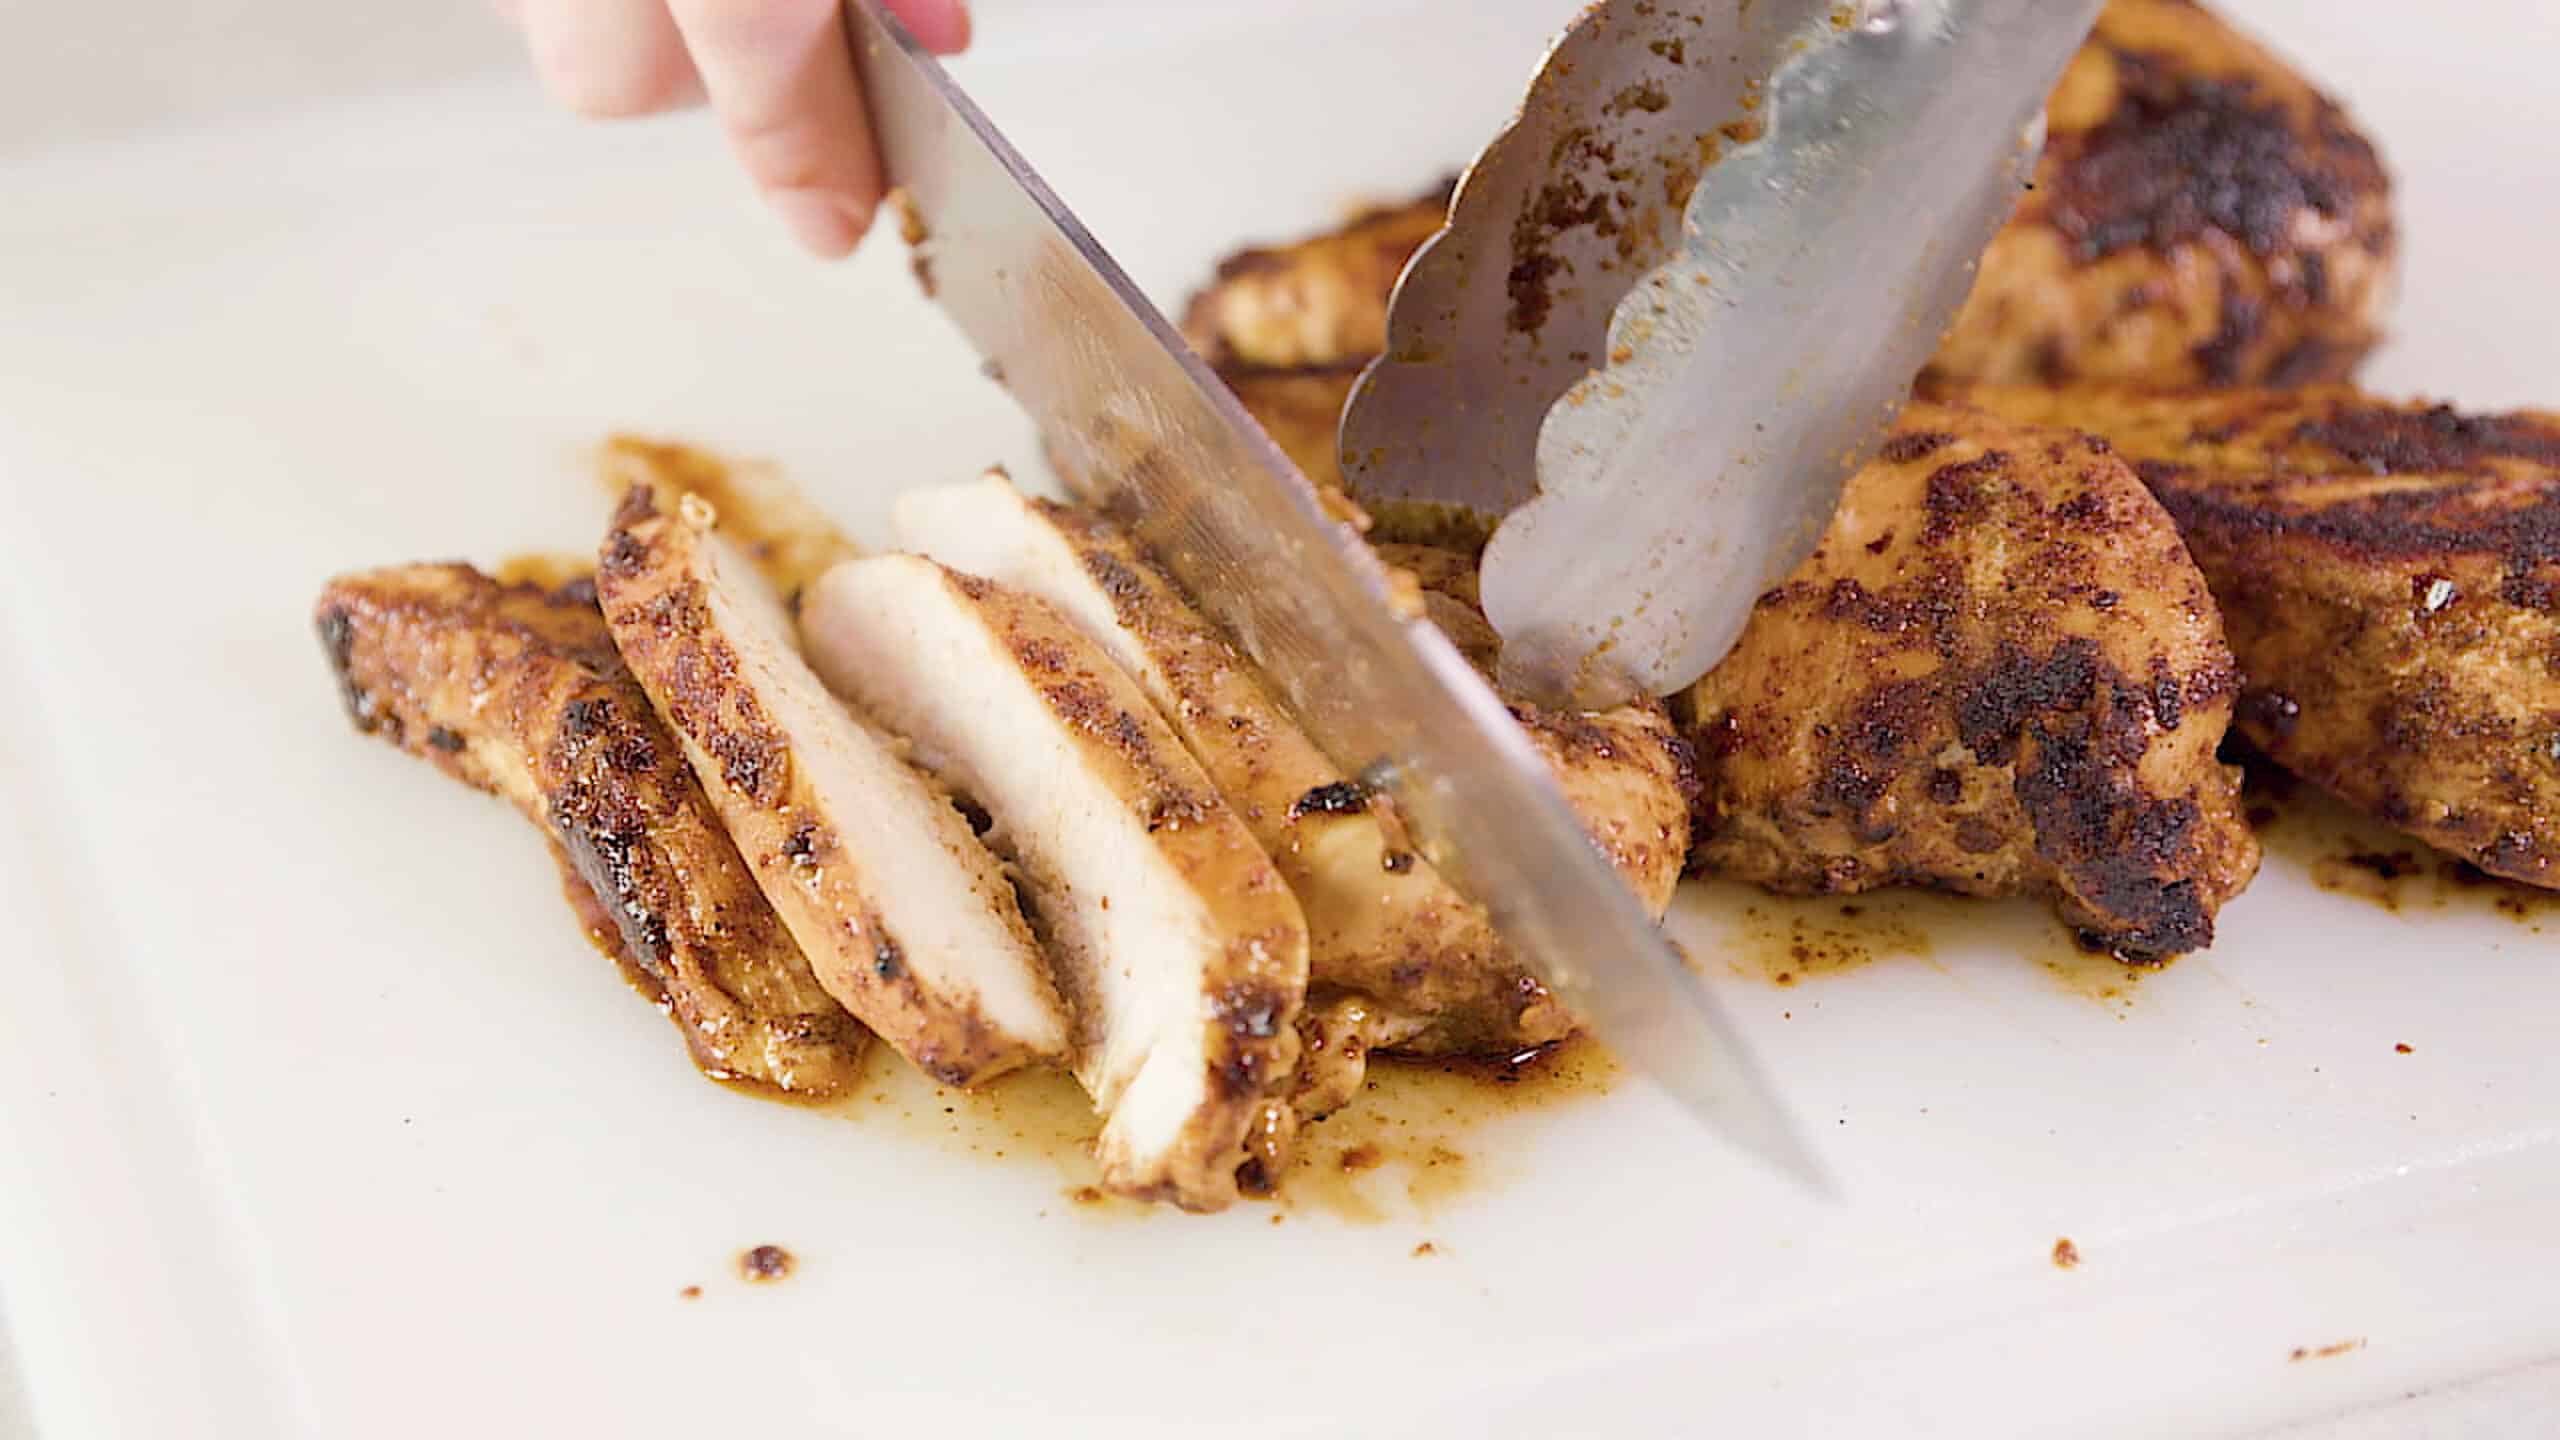 Close-up view of a white plastic cutting board topped with cooked seasoned chicken breasts being sliced by hand using a metal kitchen knife.